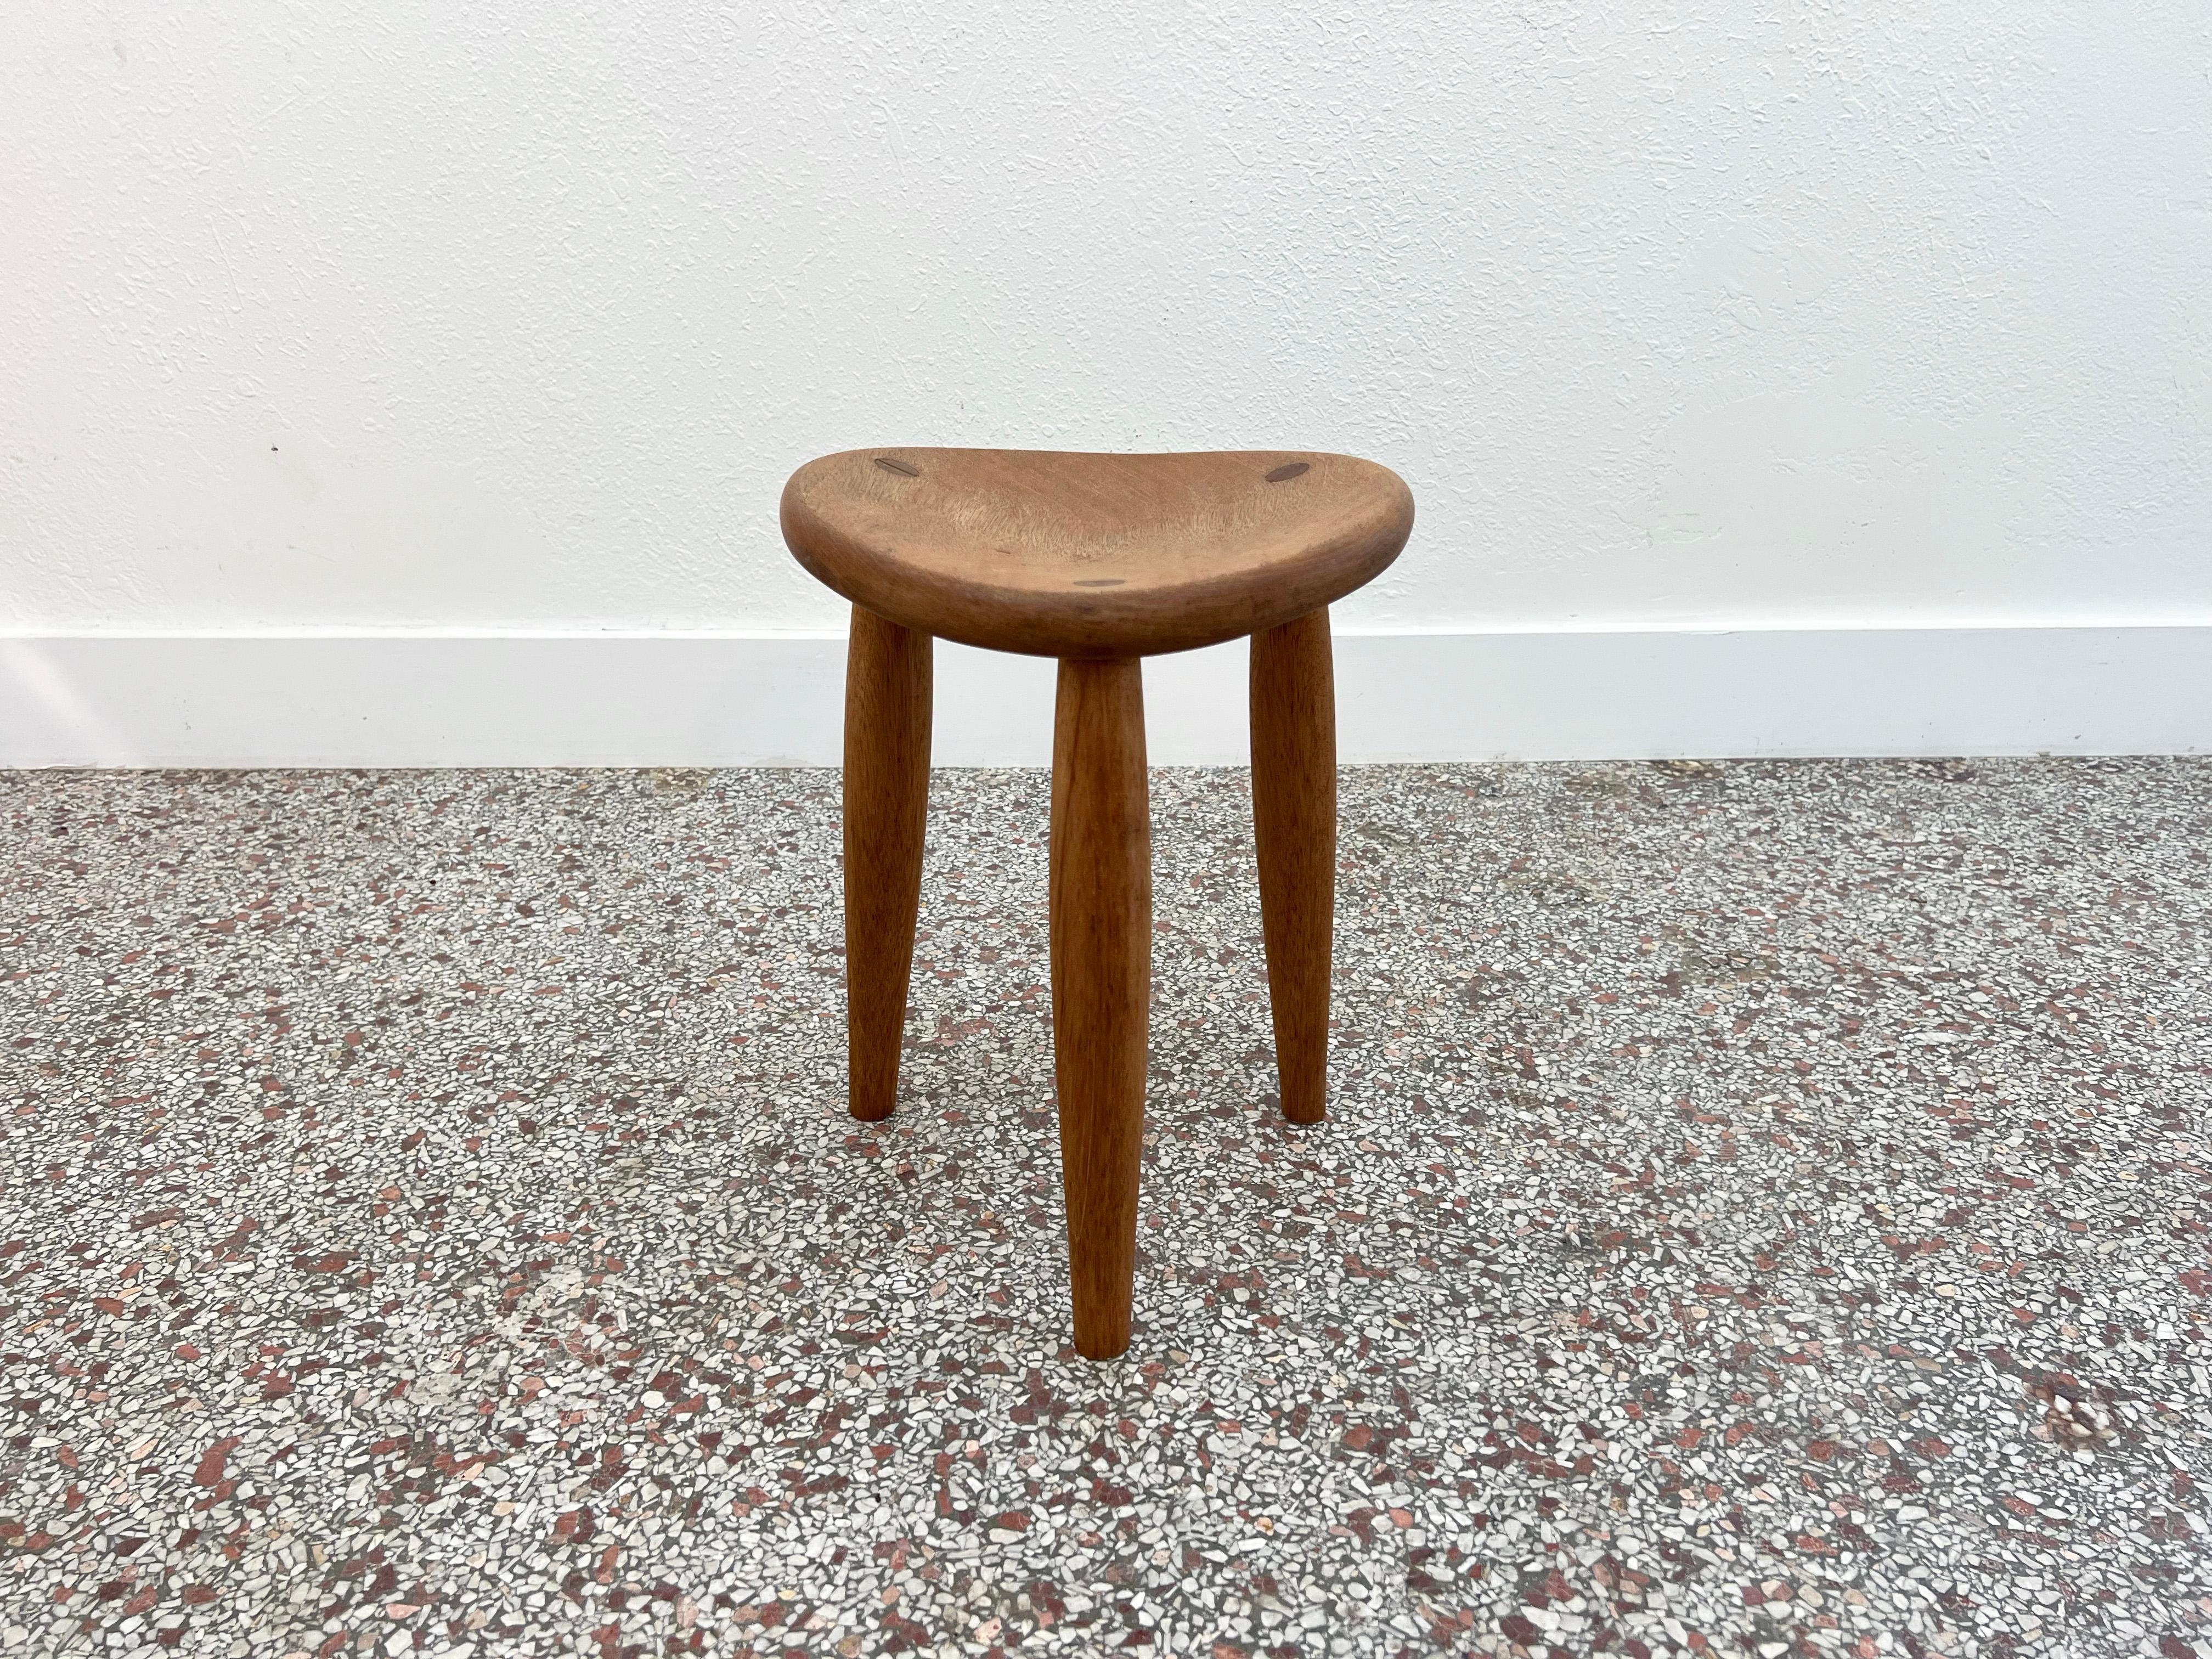 Vintage studio crafted three leg stool in oak with exposed mortise and tenon joints. A curved seat provides a comfortable seat and exemplifies the superior craftsmanship of a timeless design. 

Maker: Unknown

Year: 1950s - 60s

Dimensions: